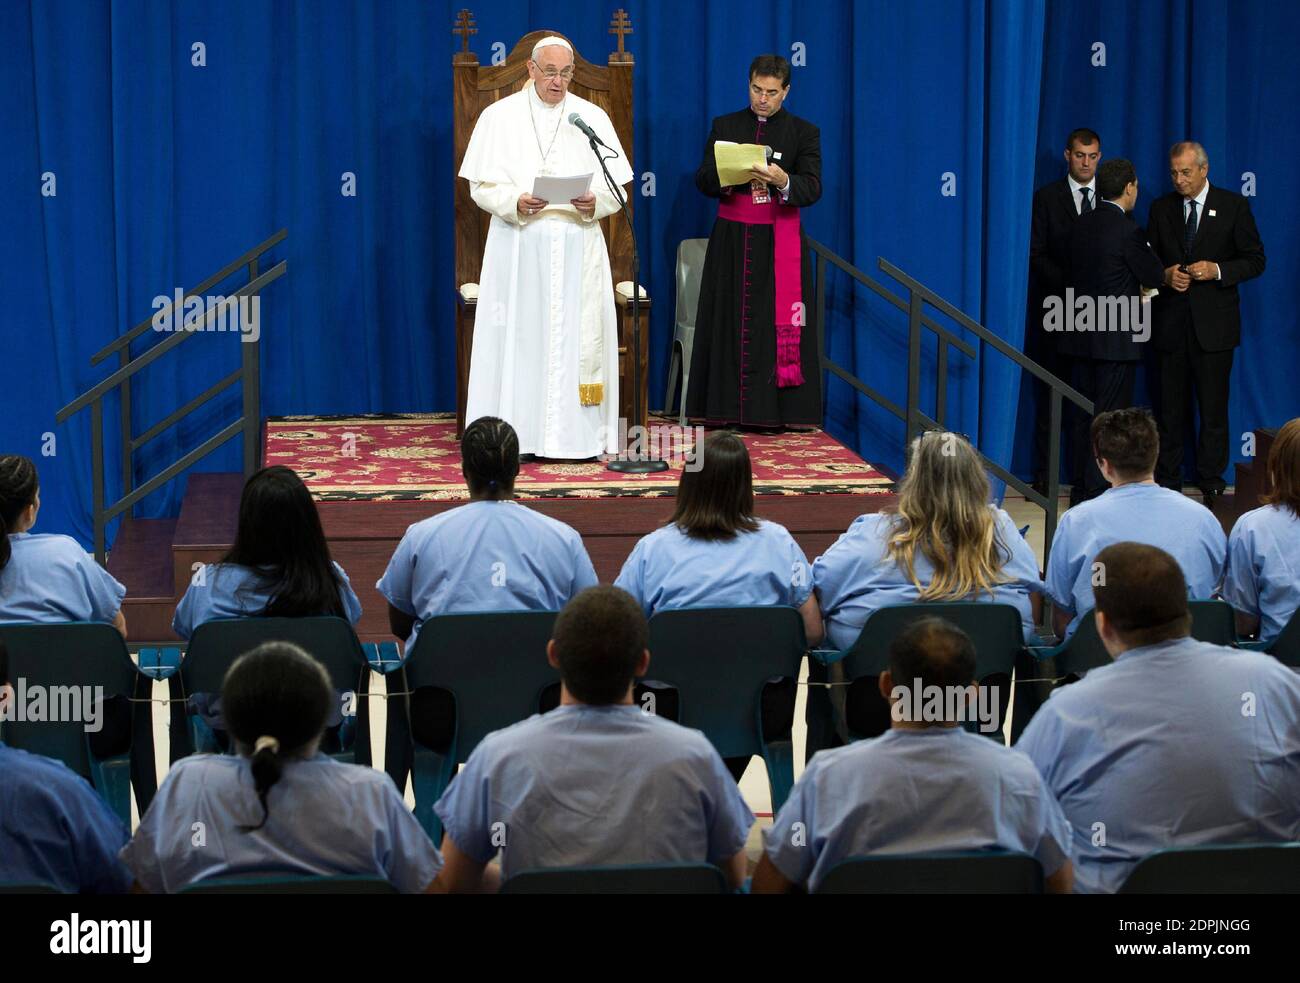 Pope Francis visits a prison in Philadelphia, USA on September 27, 2015. Pope Francis offered encouragement to about 100 male and female inmates at a detention center, his latest high-profile expression of concern for the world's imprisoned. Photo by ABACAPRESS.COM Stock Photo